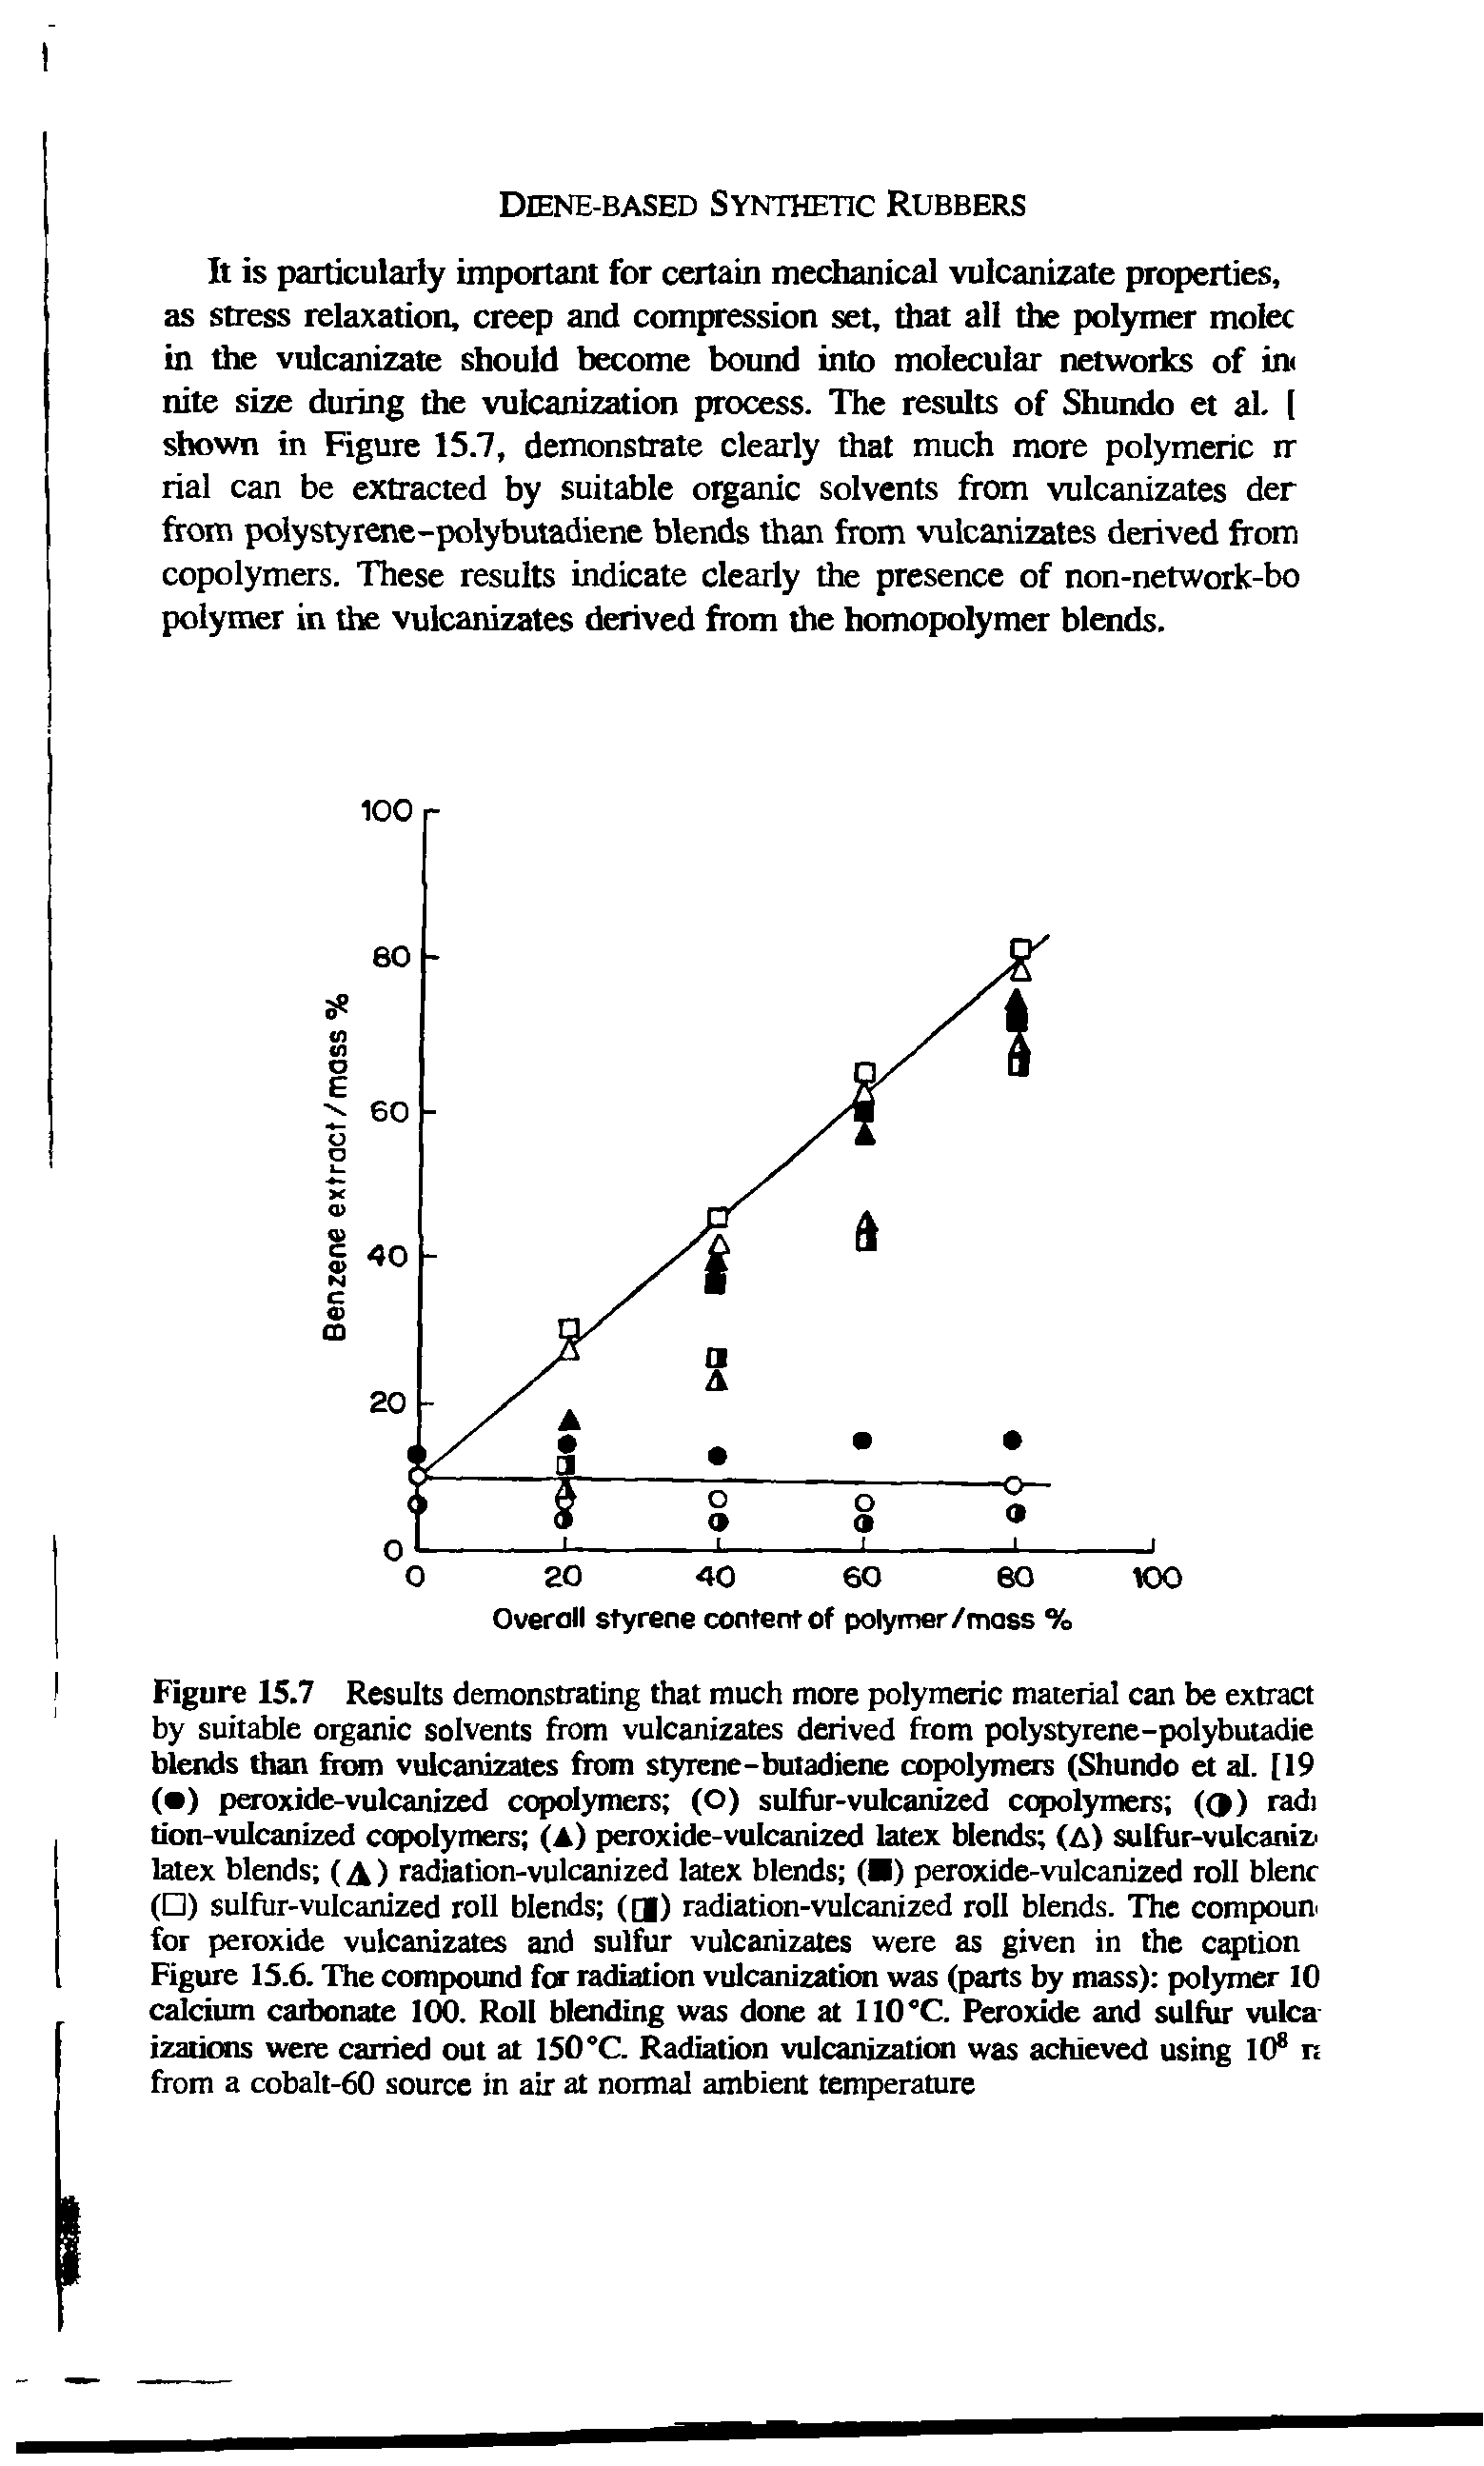 Figure 15.7 Results demonstrating that much more polymeric material can be extract by suitable organic solvents bom vulcanizates derived from polystyrene-polybutadie blends than from vulcanizates from styrene-butadiene copolymers (Shundo et al. [19 ( ) peroxide-vulcanized copolymers (O) sulfur-vulcanized copolymers (O) radi don-vulcanized copolymers (A) peroxide-vulcanized latex blends (A) sulfiir-vulcaniz< latex blends (A) radiation-vulcanized latex blends ( ) peroxide-vulcanized roll blenr ( ) sulfur-vulcanized roll blends (Qf) radiation-vulcanized roll blends. The compoun for peroxide vulcanizates and sulfur vulcanizates were as given in the cation Figure 15.6. The compound for radiation vulcanization was (parts by mass) polymer 10 calcium caibonate ICIO. Roll blending was done at 110°C. Peroxide and sulfur vulca-izatkxis were carried out at 150°C. Radiation vulcanization was achieved using 10 n from a cobaIt-60 source in air at normal ambient temperature...